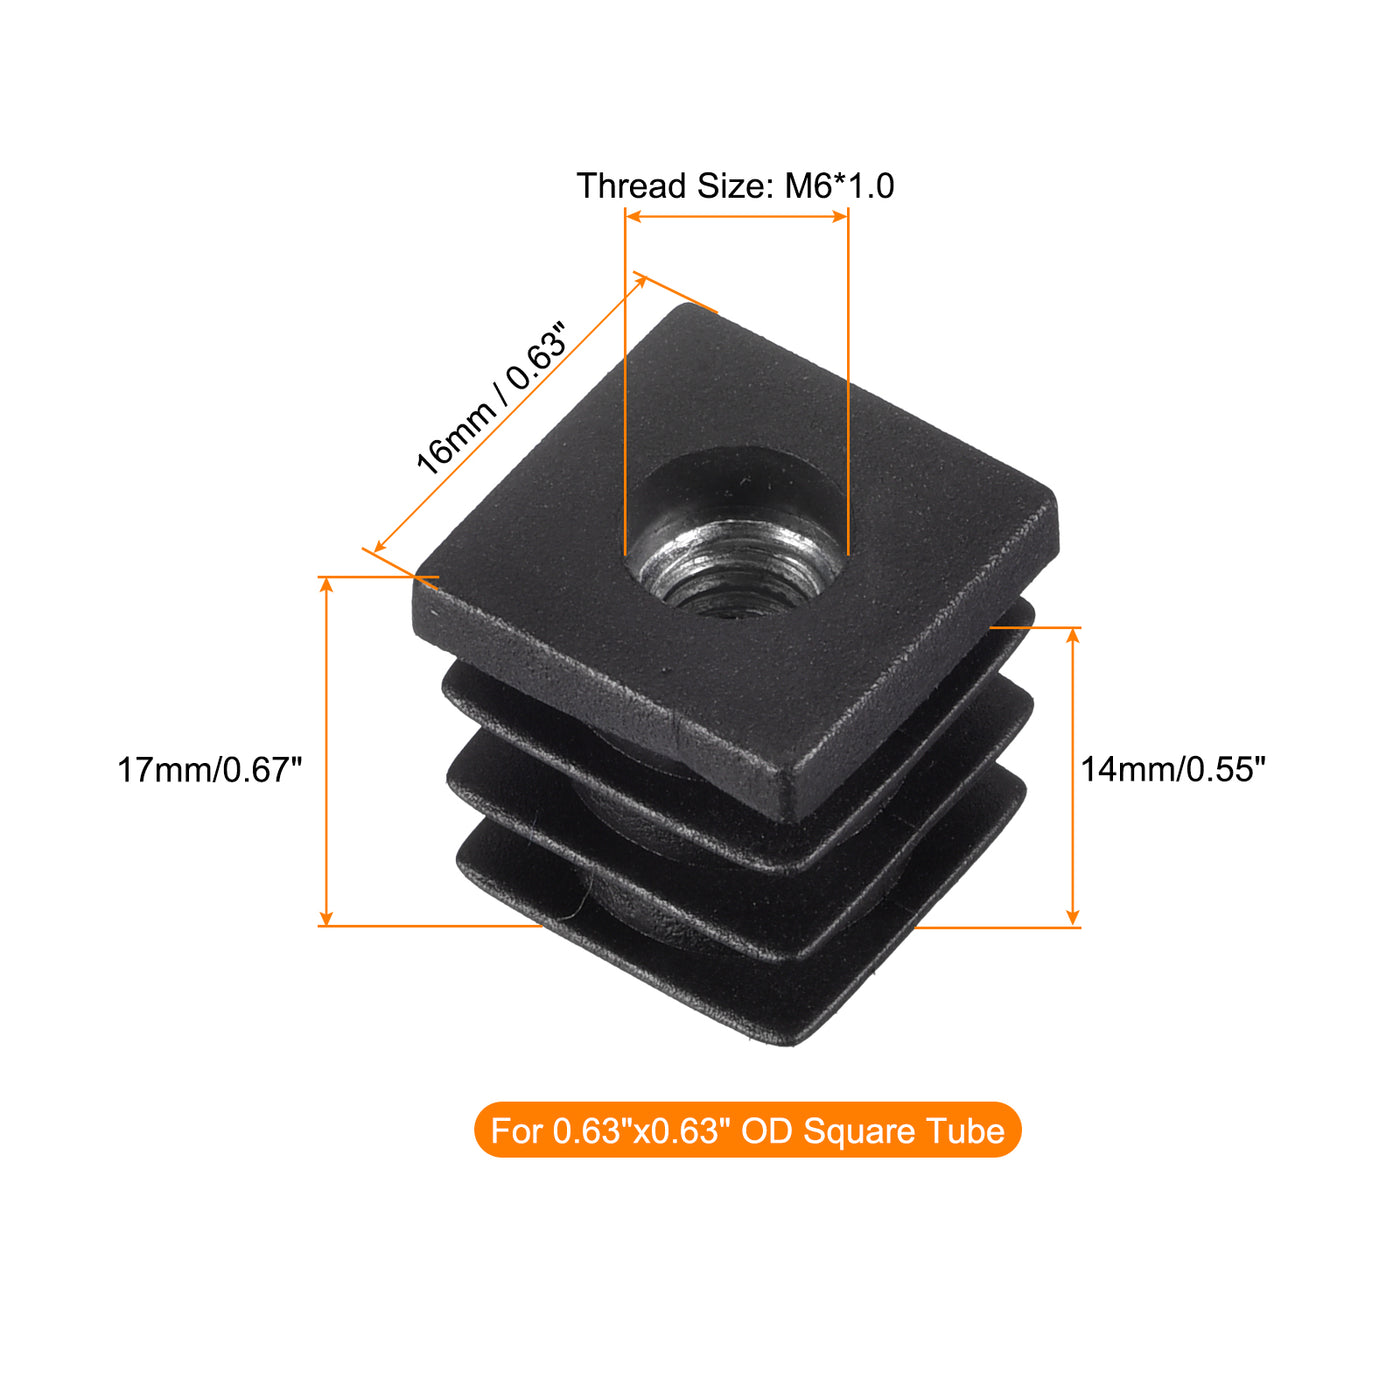 uxcell Uxcell 8Pcs 0.63"x0.63" Caster Insert with Thread, Square M6 Thread for Furniture